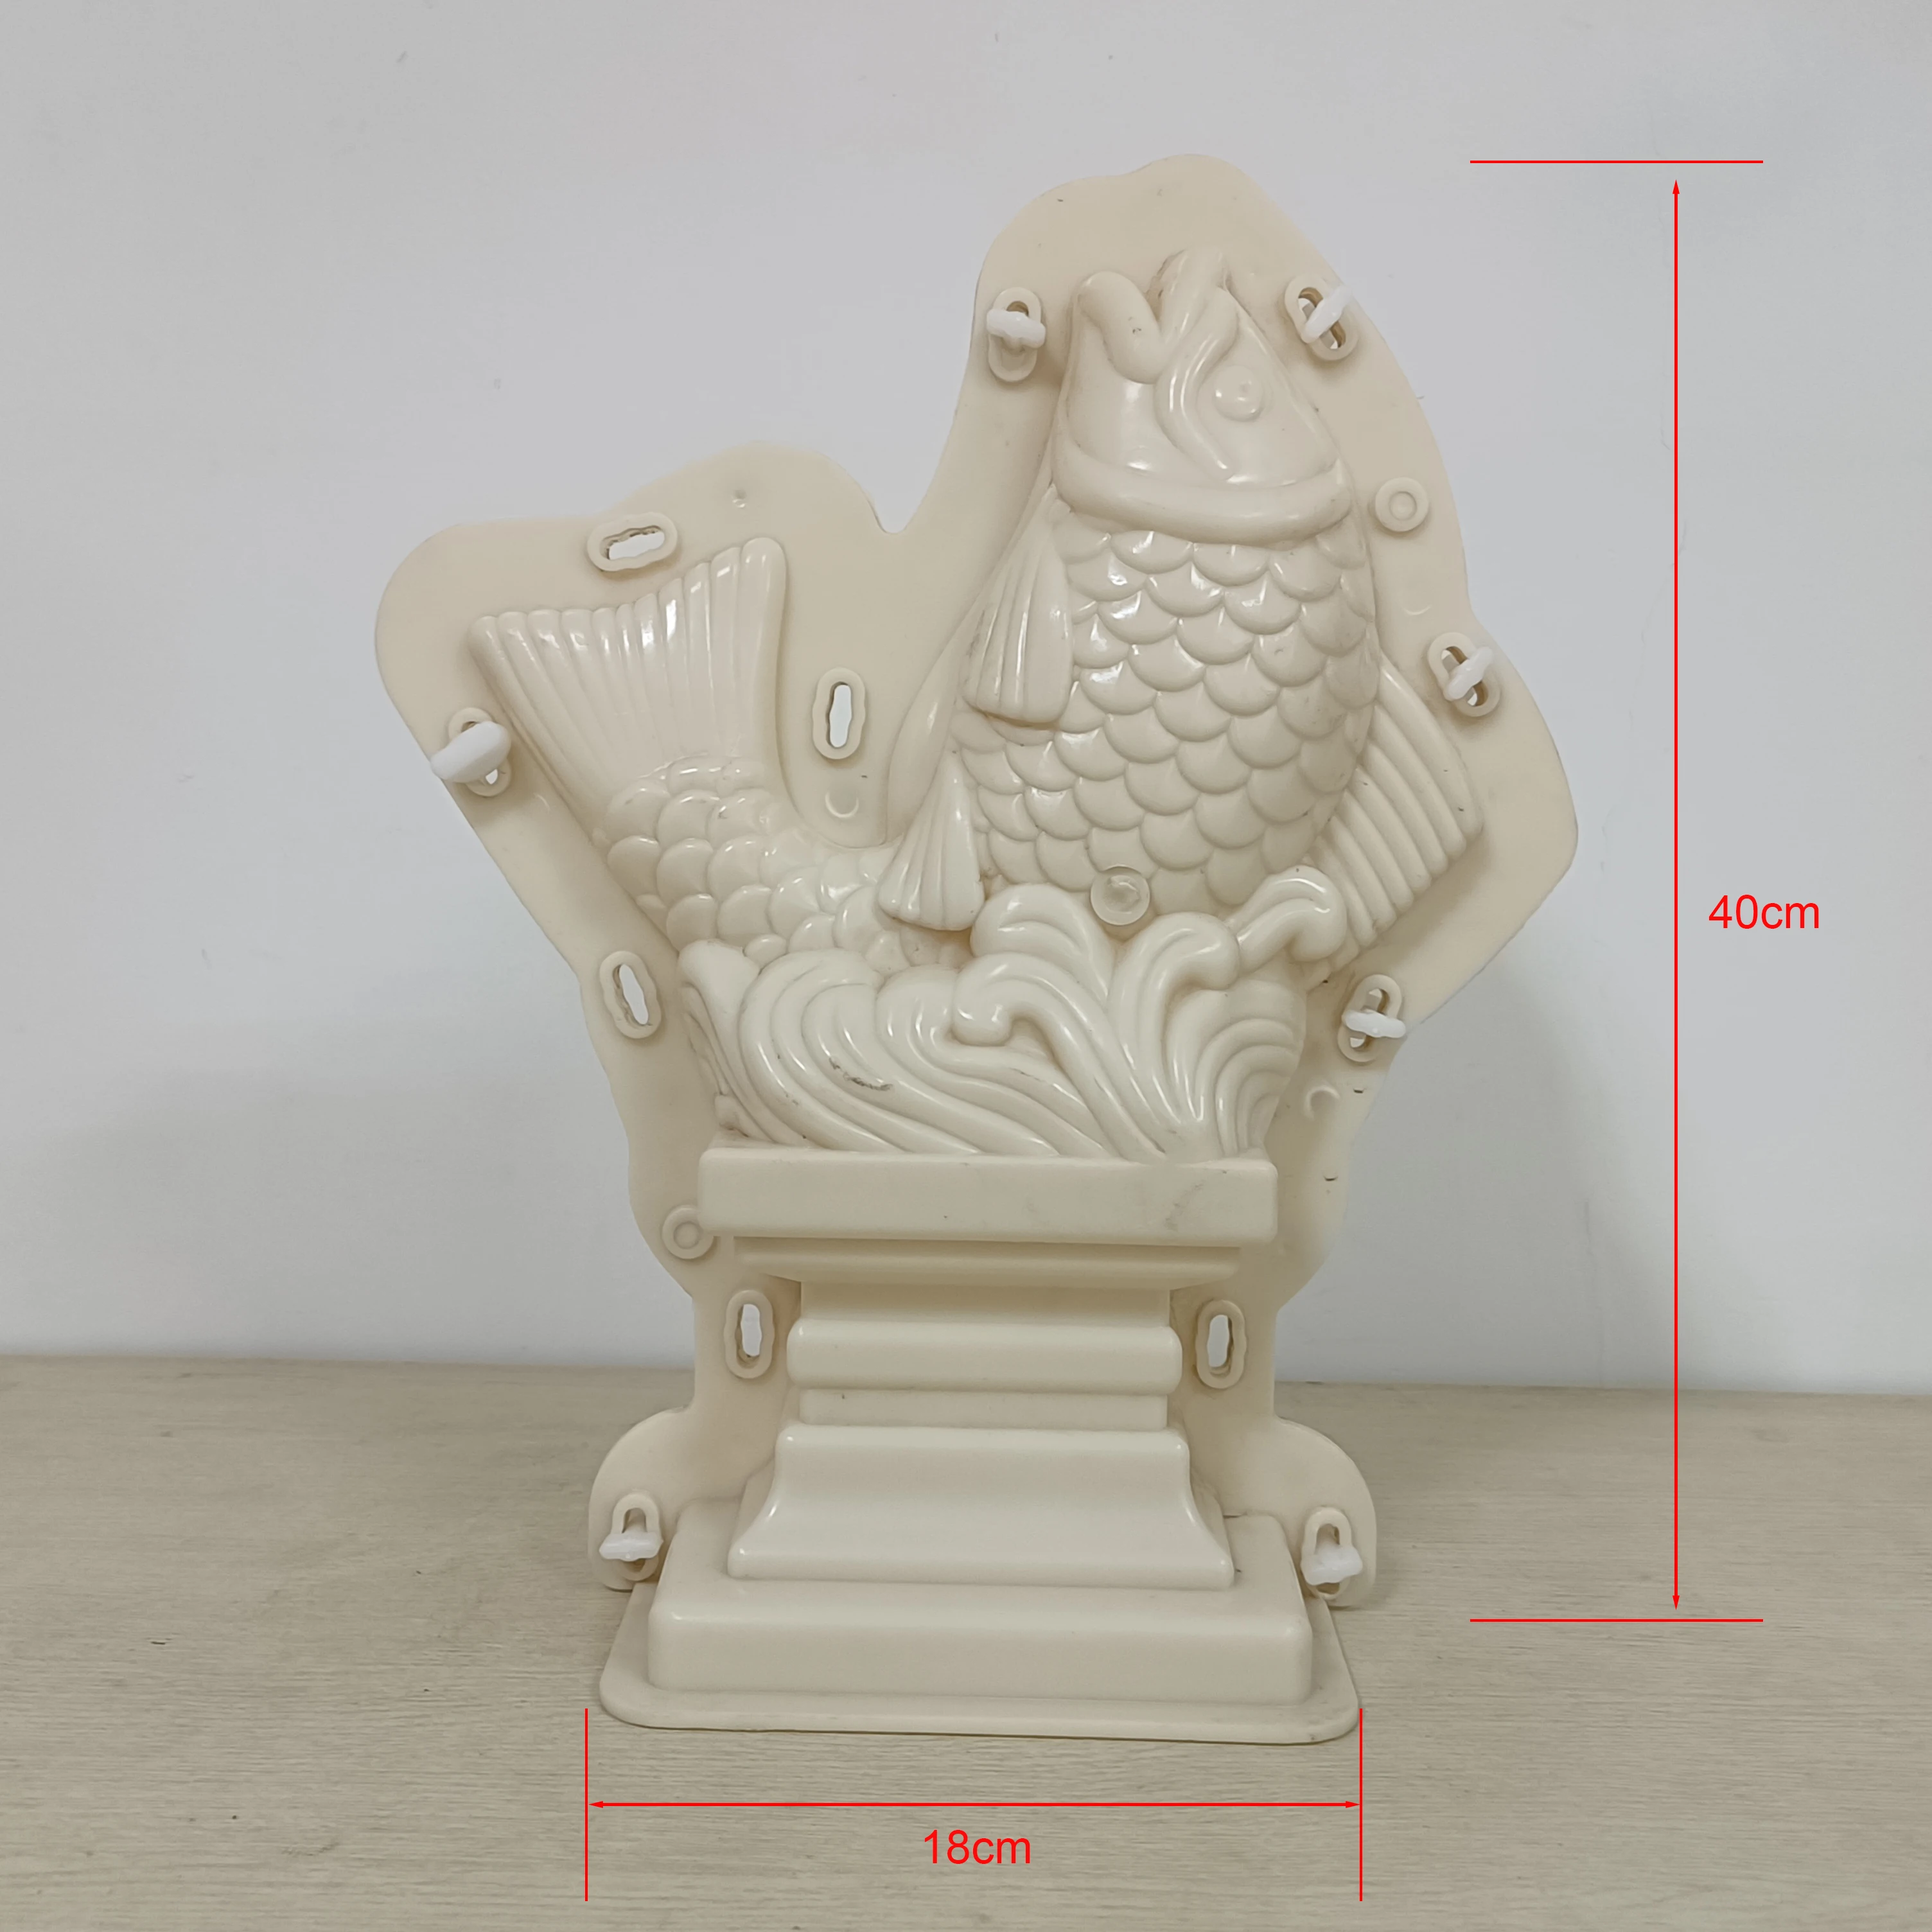 Reazone ABS High quality factory price low MOQ concrete animal fish mold for sale images - 6